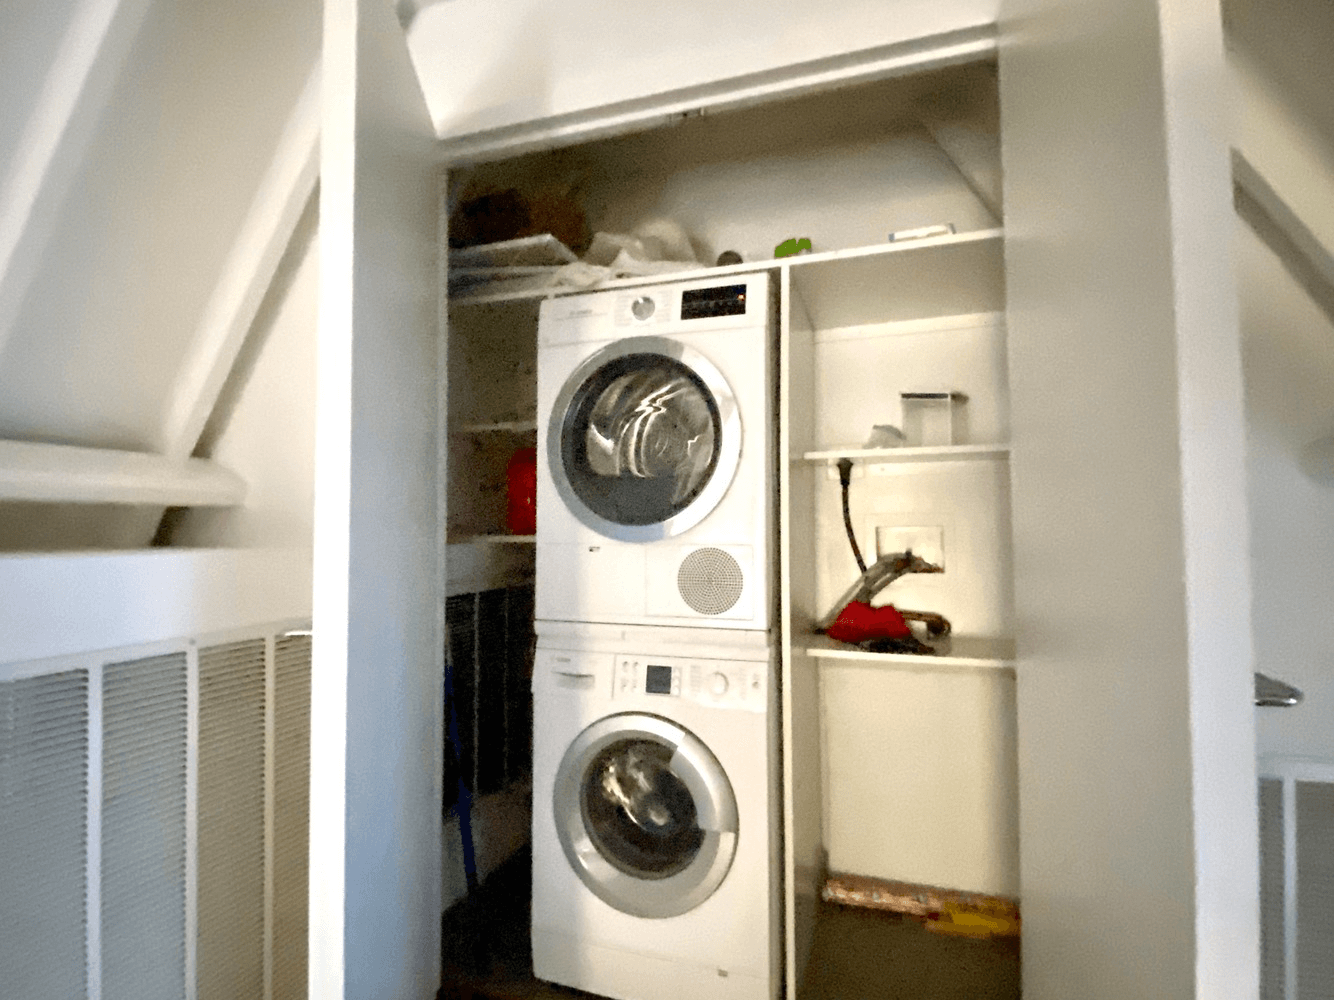 in-unit laundry in a closet